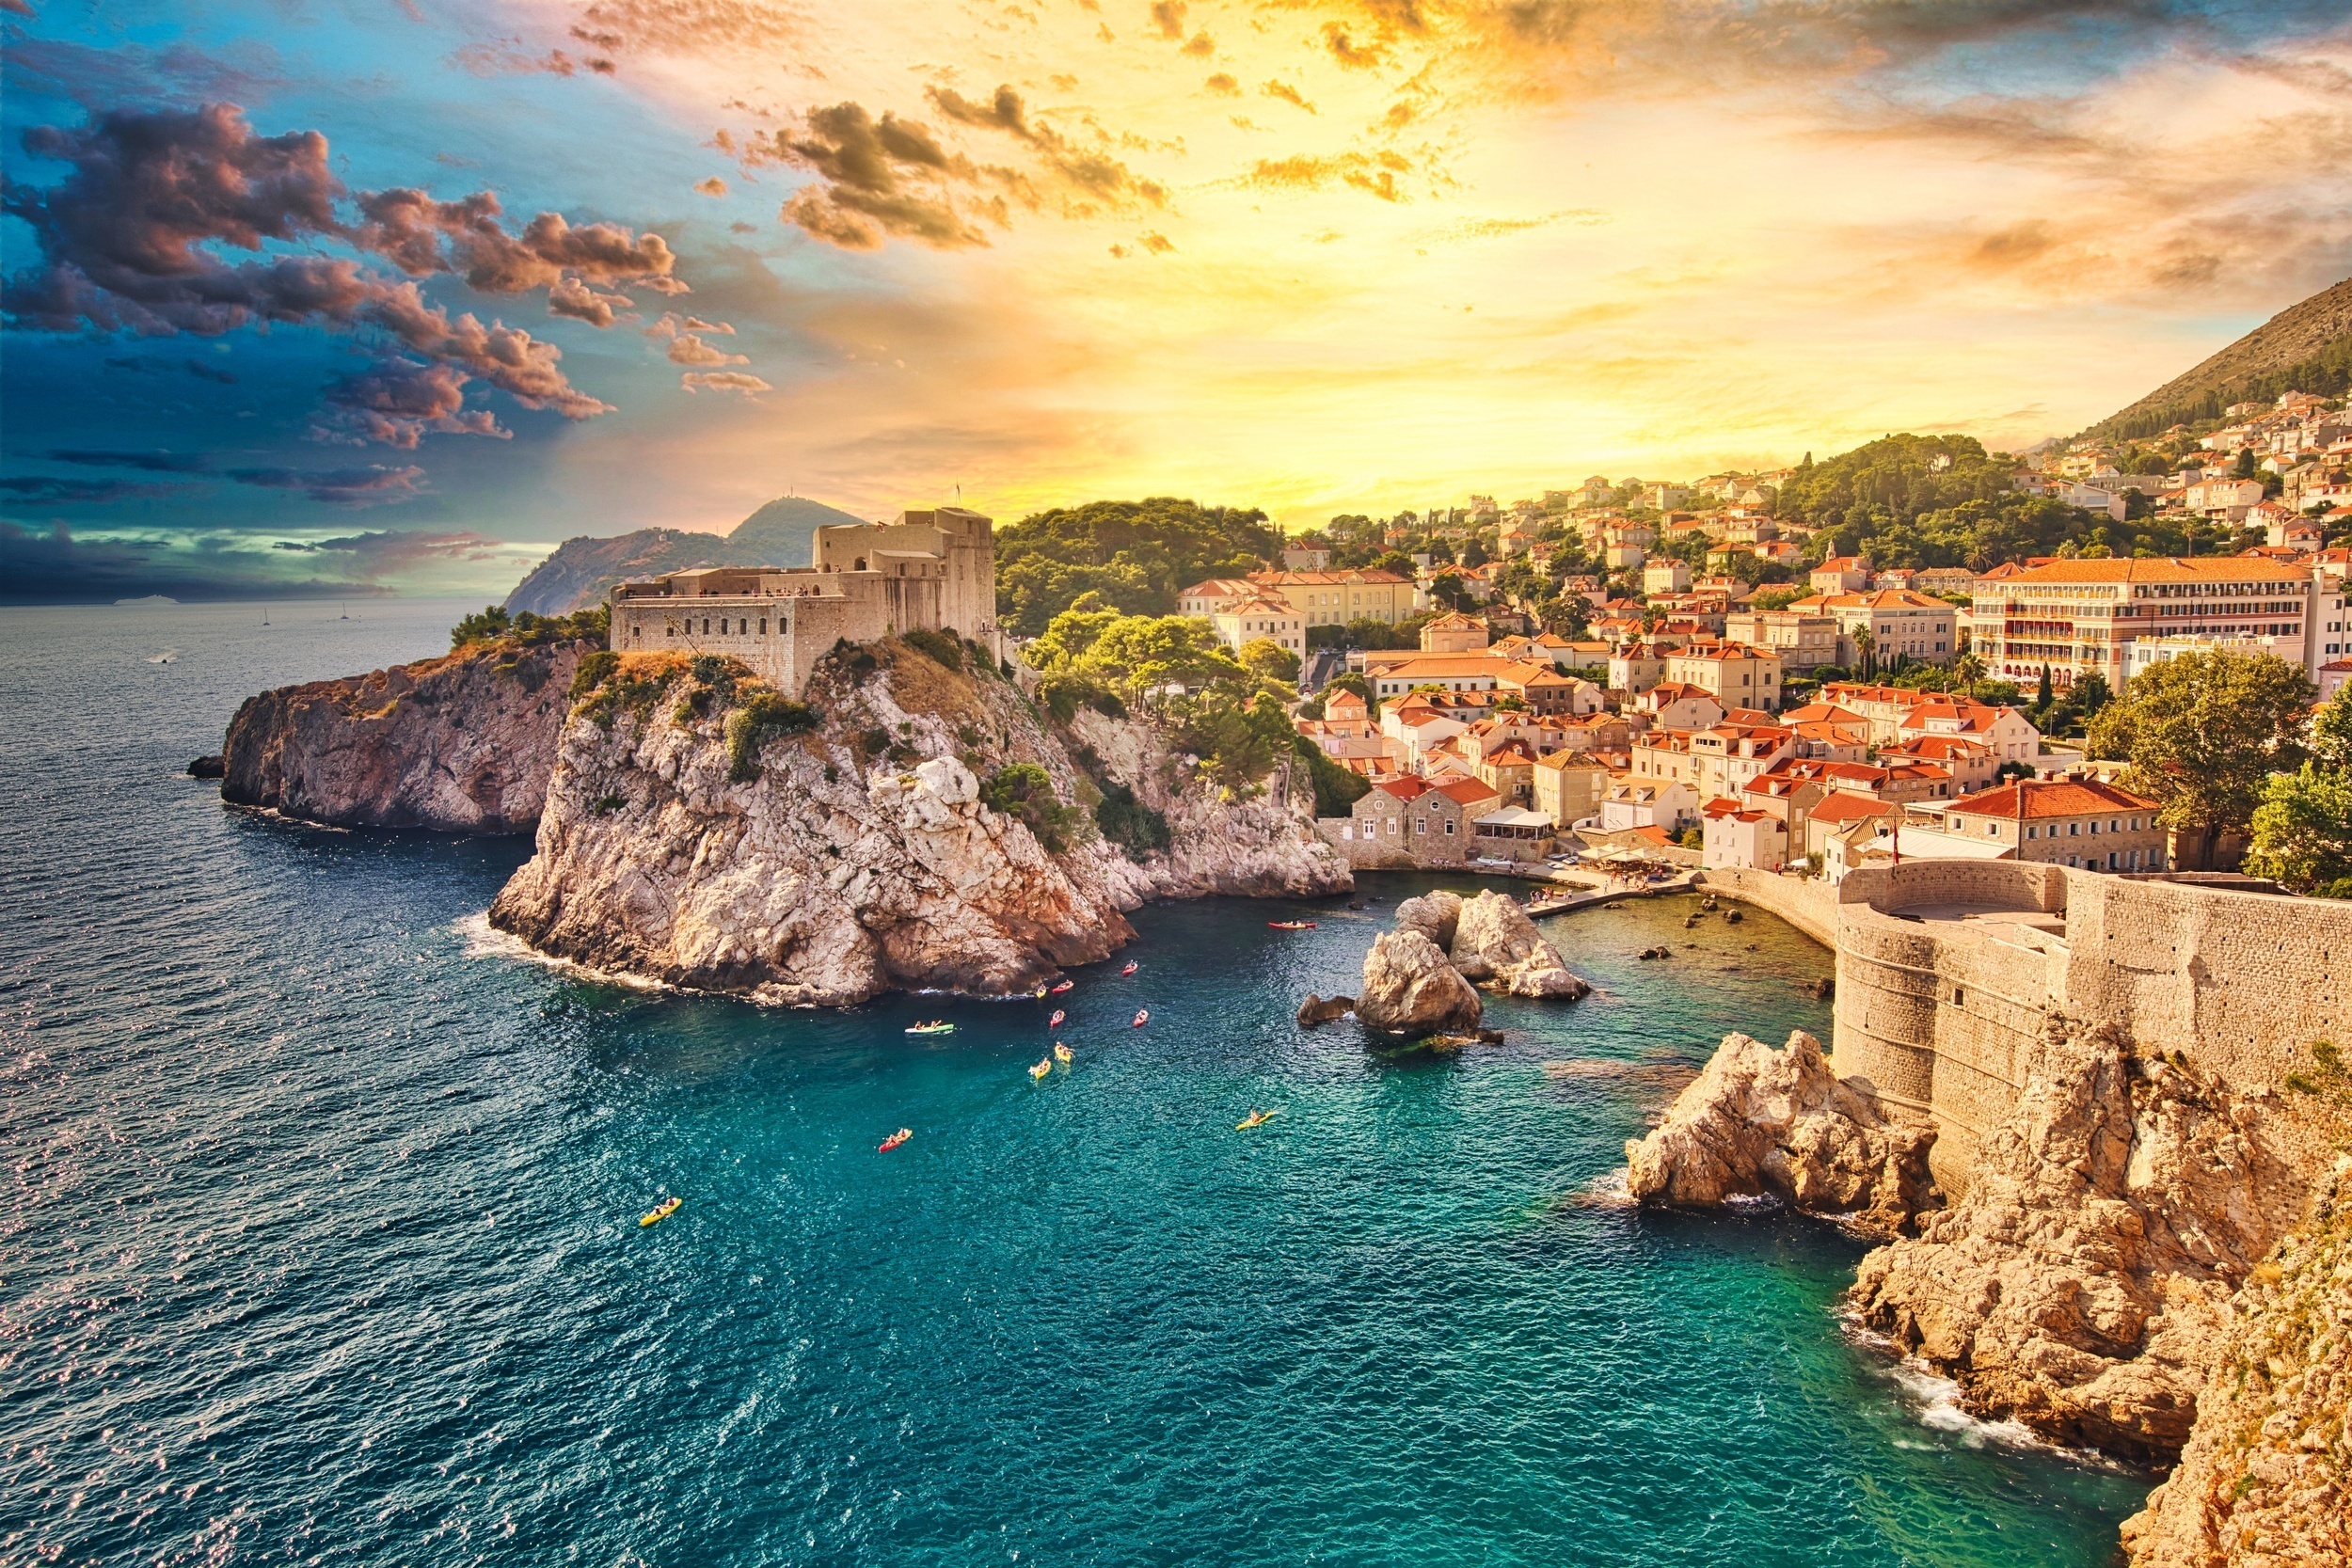 <p>The Balkan countries are an underrated part of Europe, rich in history, culture, and scenery. Not to mention kind people and unique food and drink. Here are 20 places to consider visiting!</p>